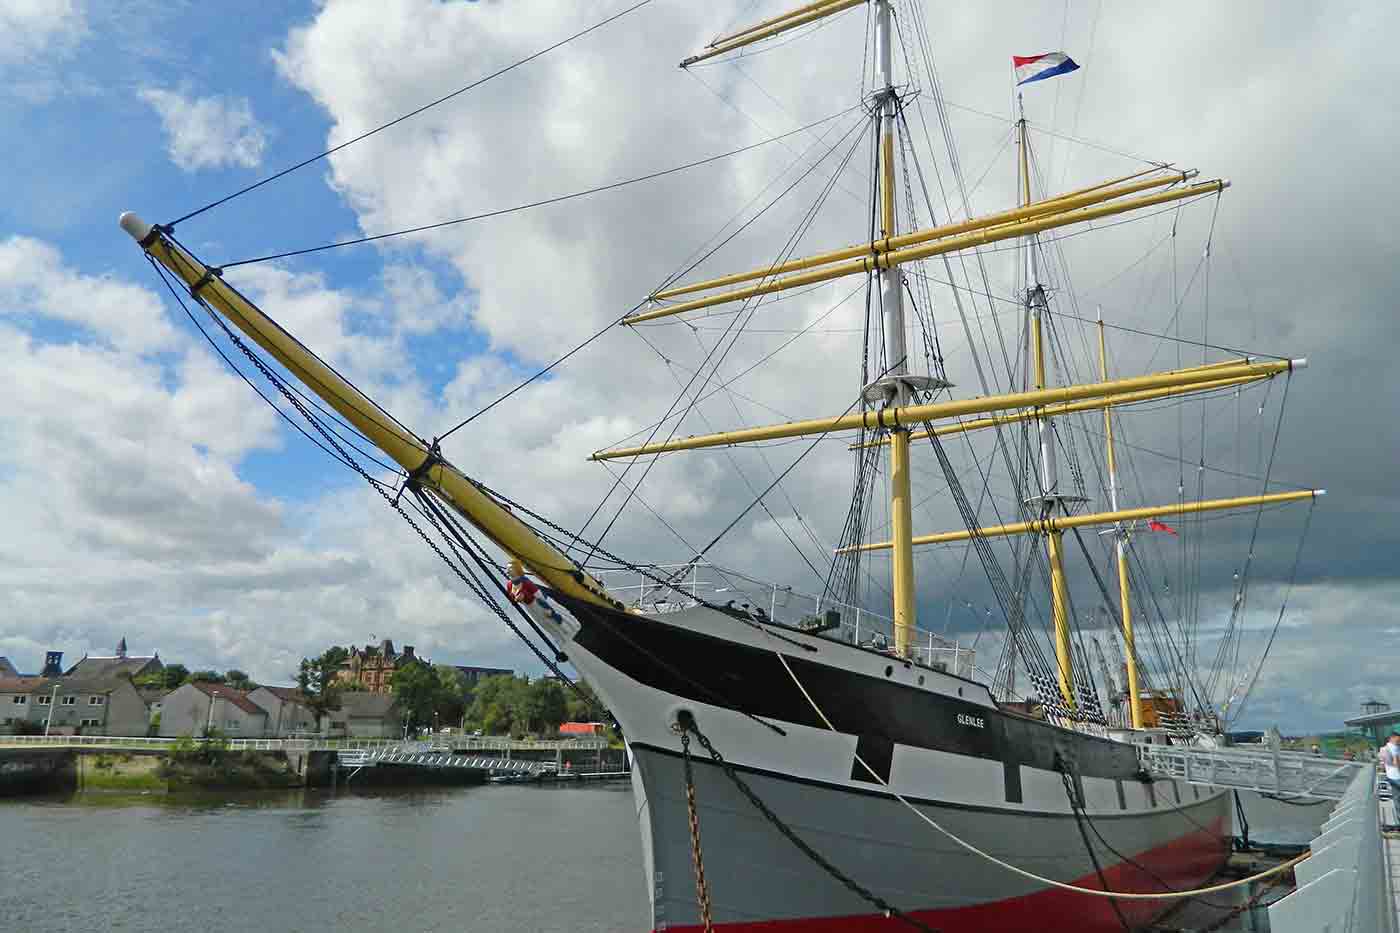 The Tall Ship Glenlee